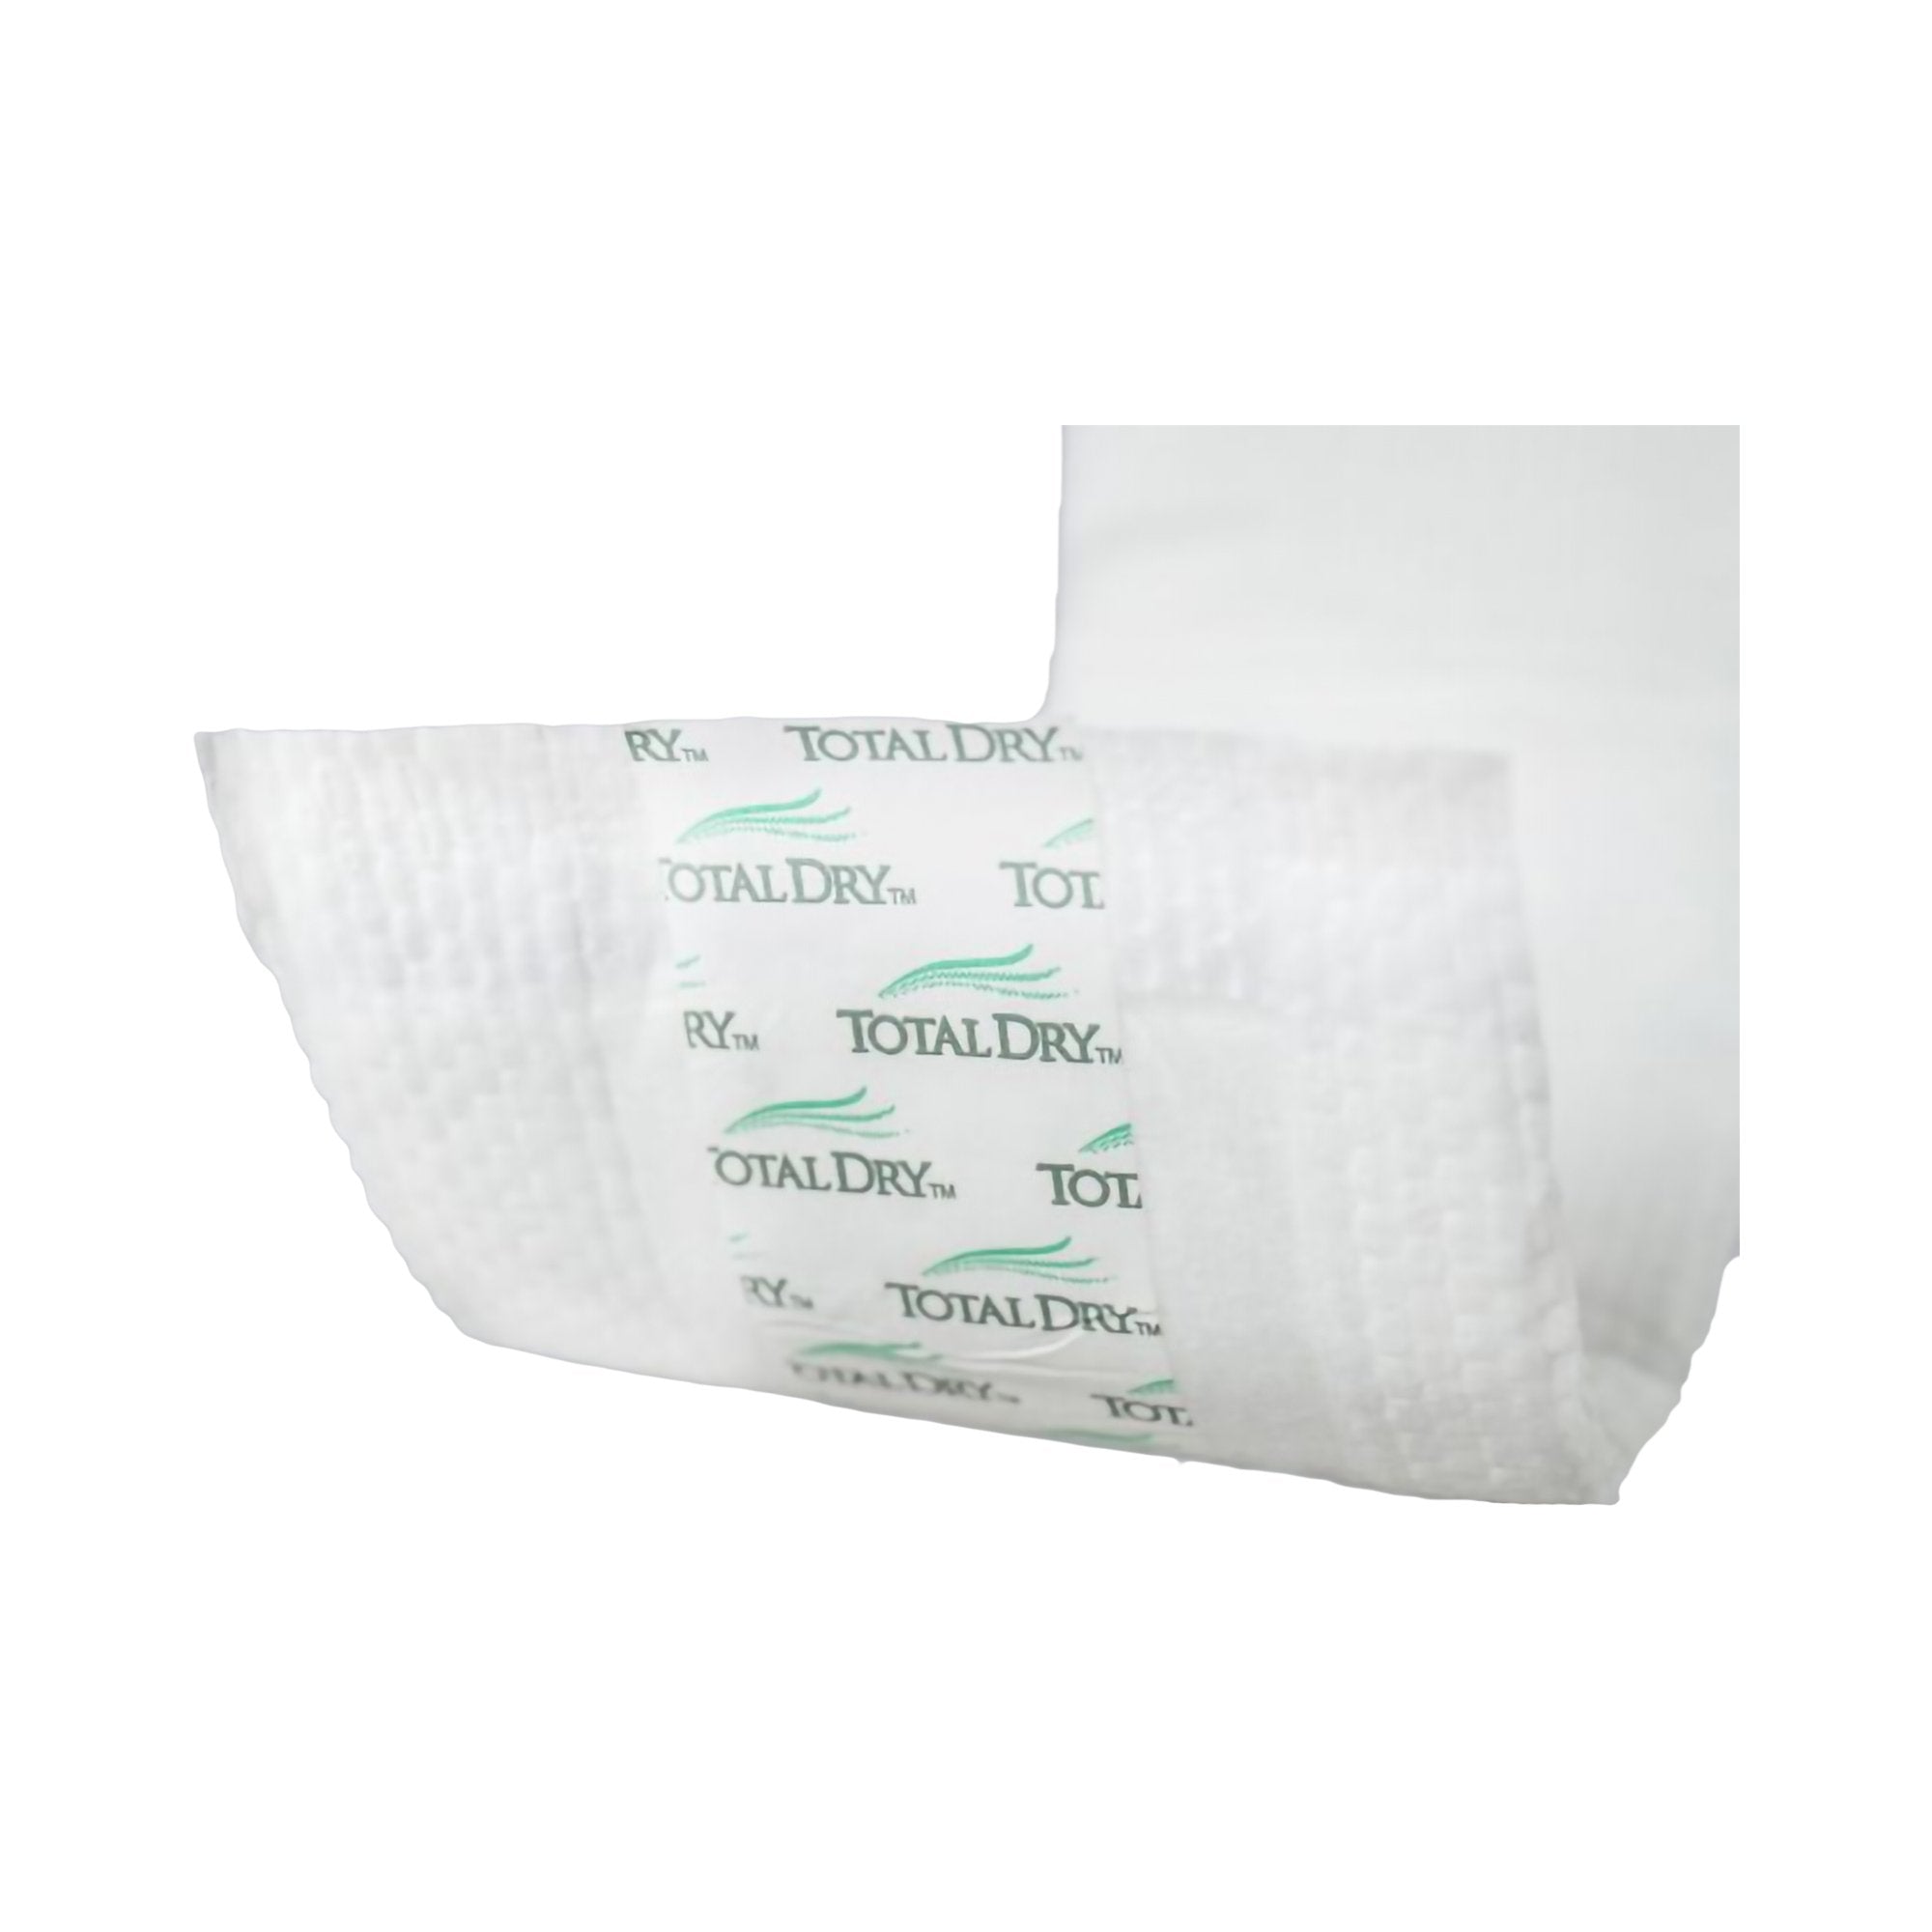 Booster Pad TotalDry™ Booster Pad Duo 12 Inch Length Heavy Absorbency SecureLoc Core One Size Fits Most